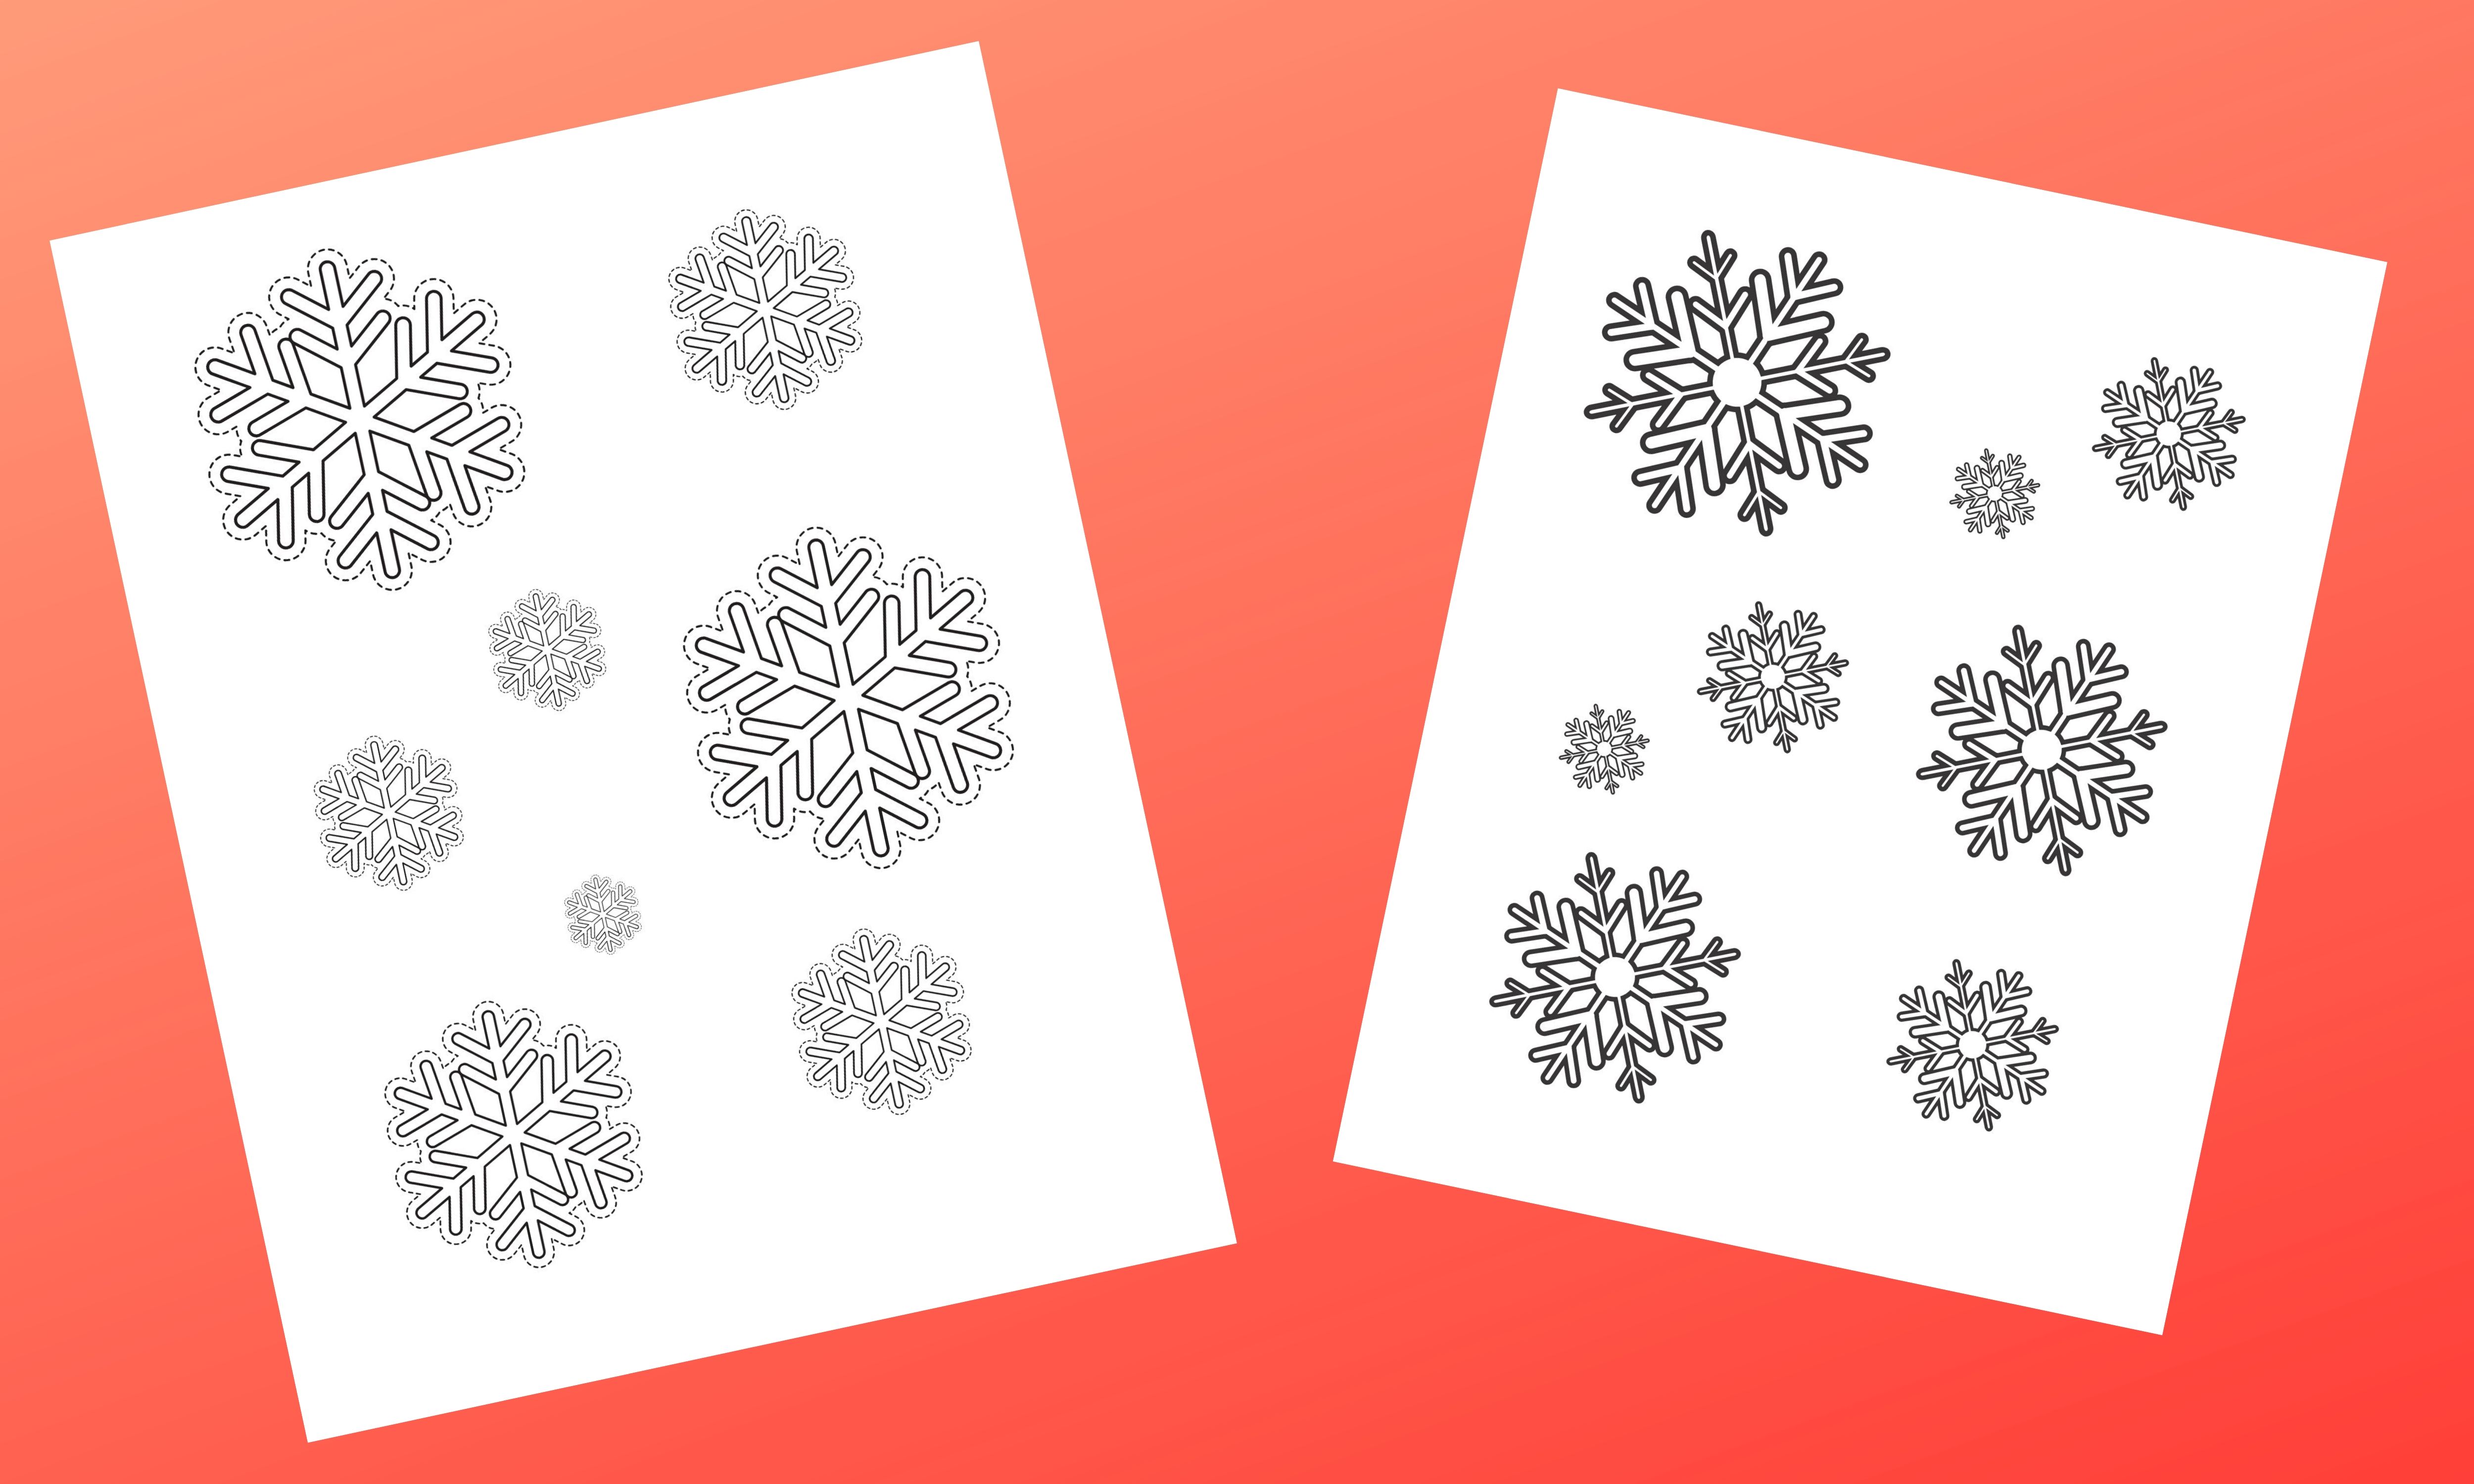 small snowflake patterns to trace